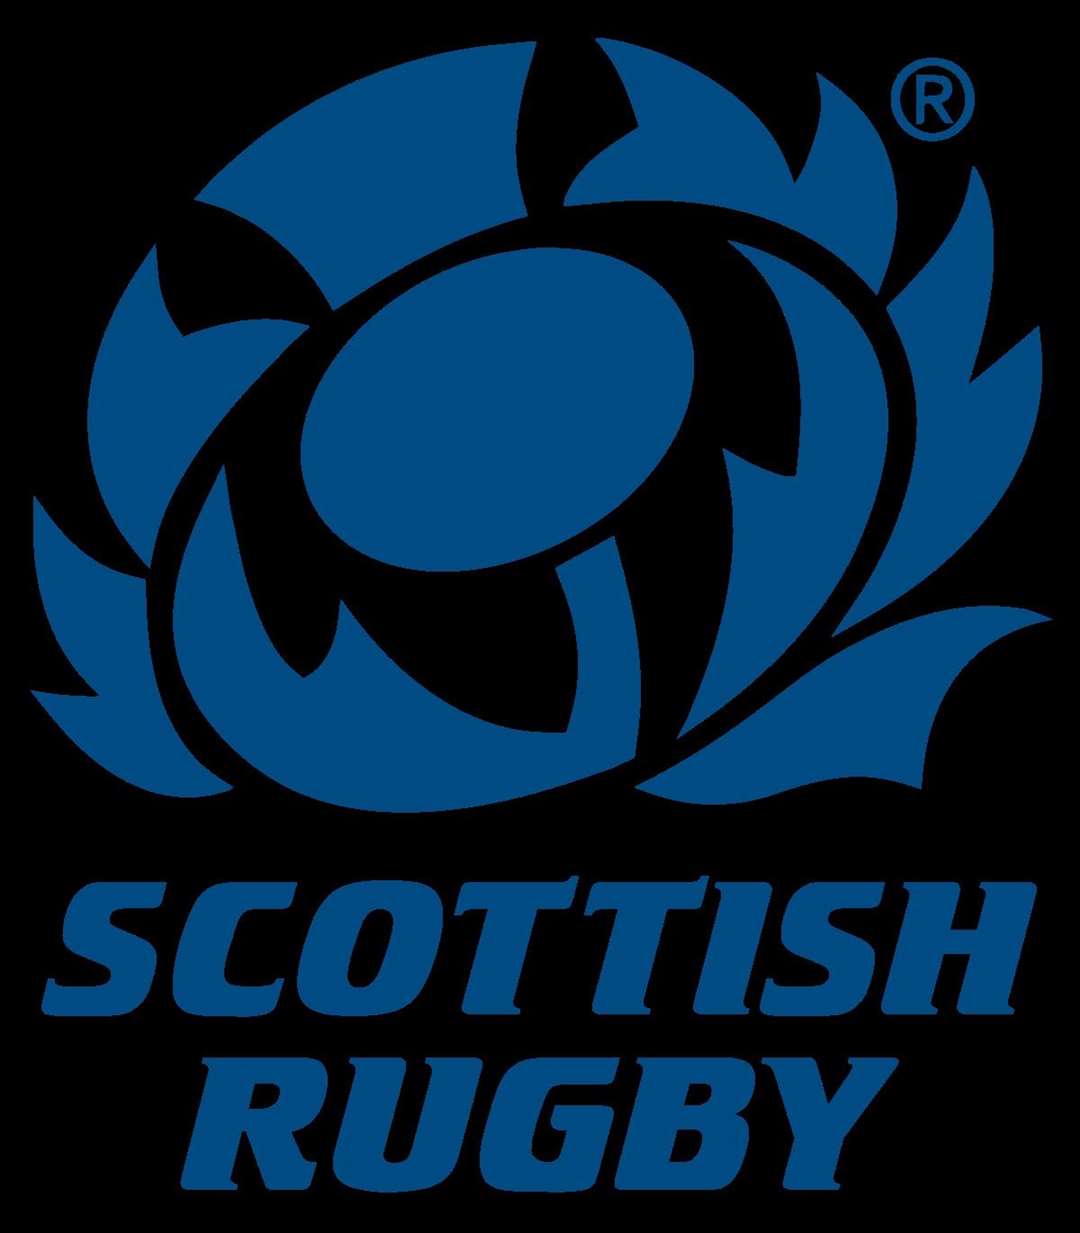 Scotland's tour of South Africa and New Zealand is off.